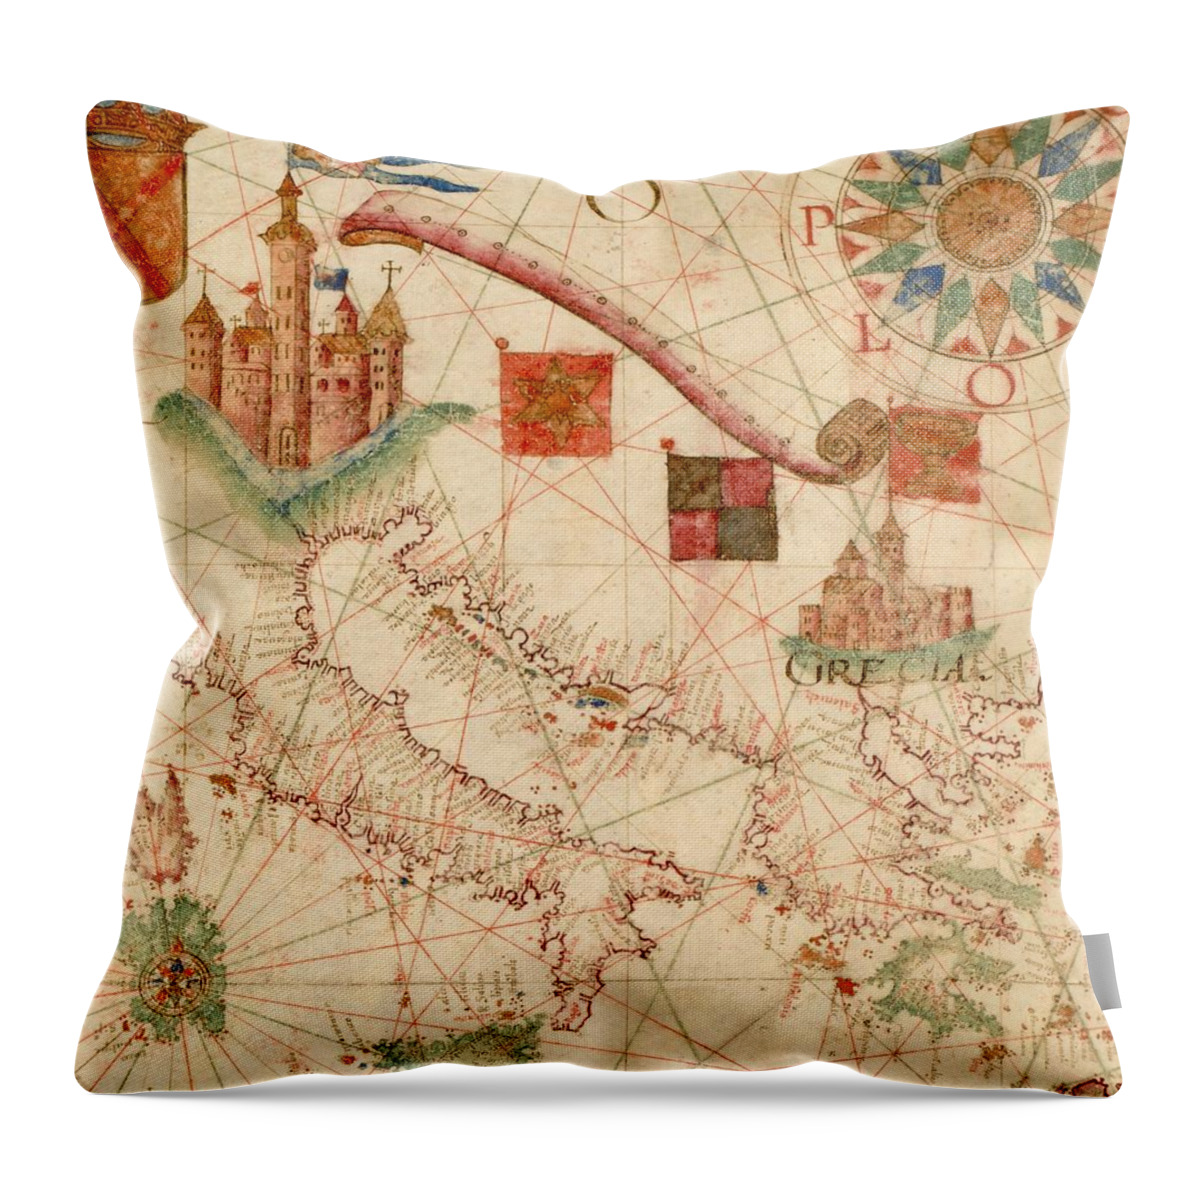 Antique Map Of Italy And Greece Throw Pillow featuring the drawing Antique Maps - Old Cartographic maps - Antique Map of the Mediterranean area - Italy, Greece by Studio Grafiikka